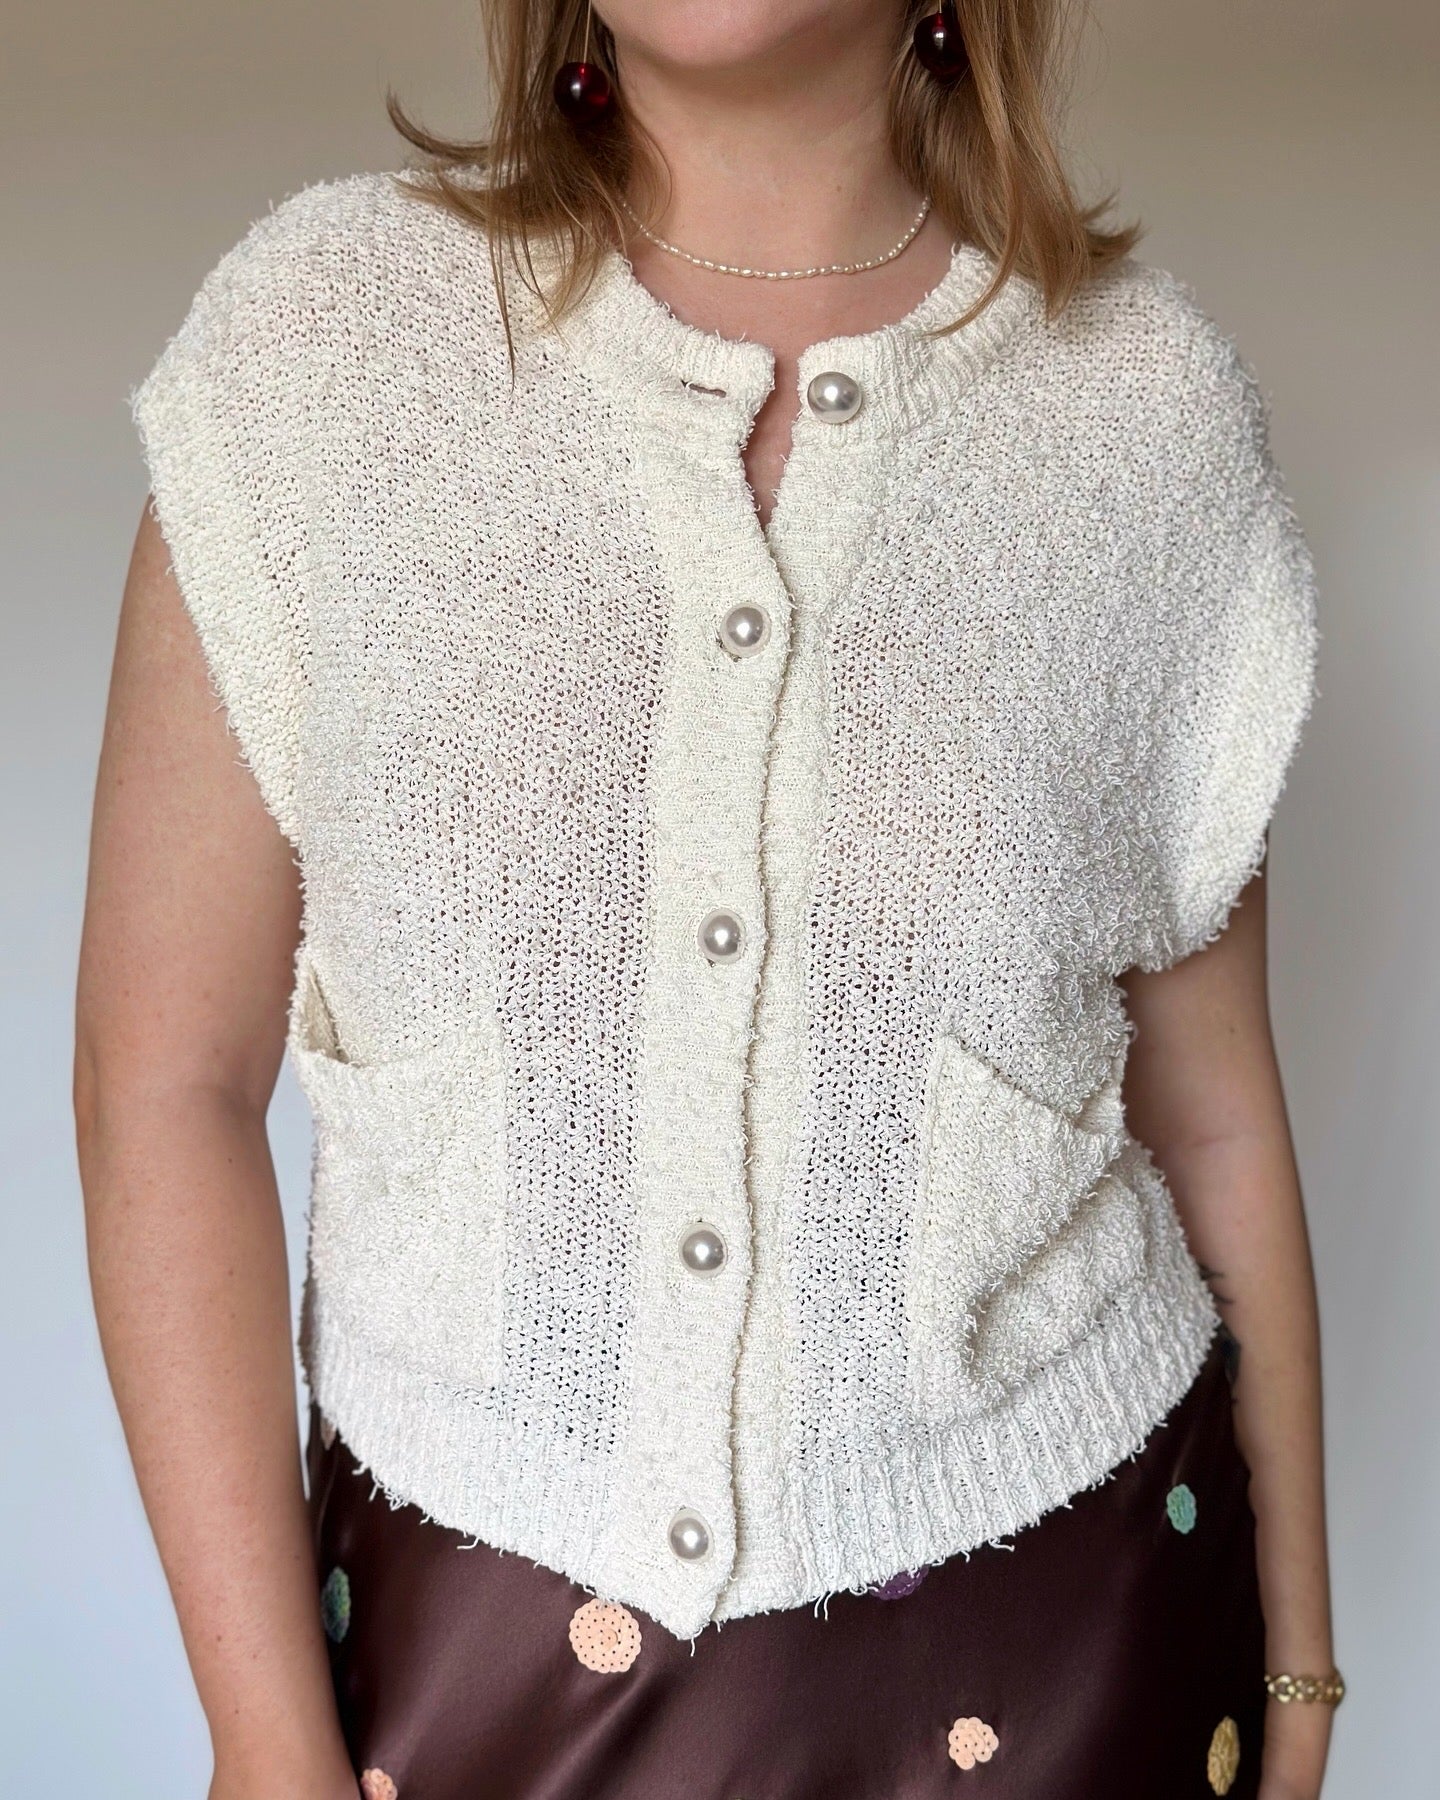 Knitted top/vest